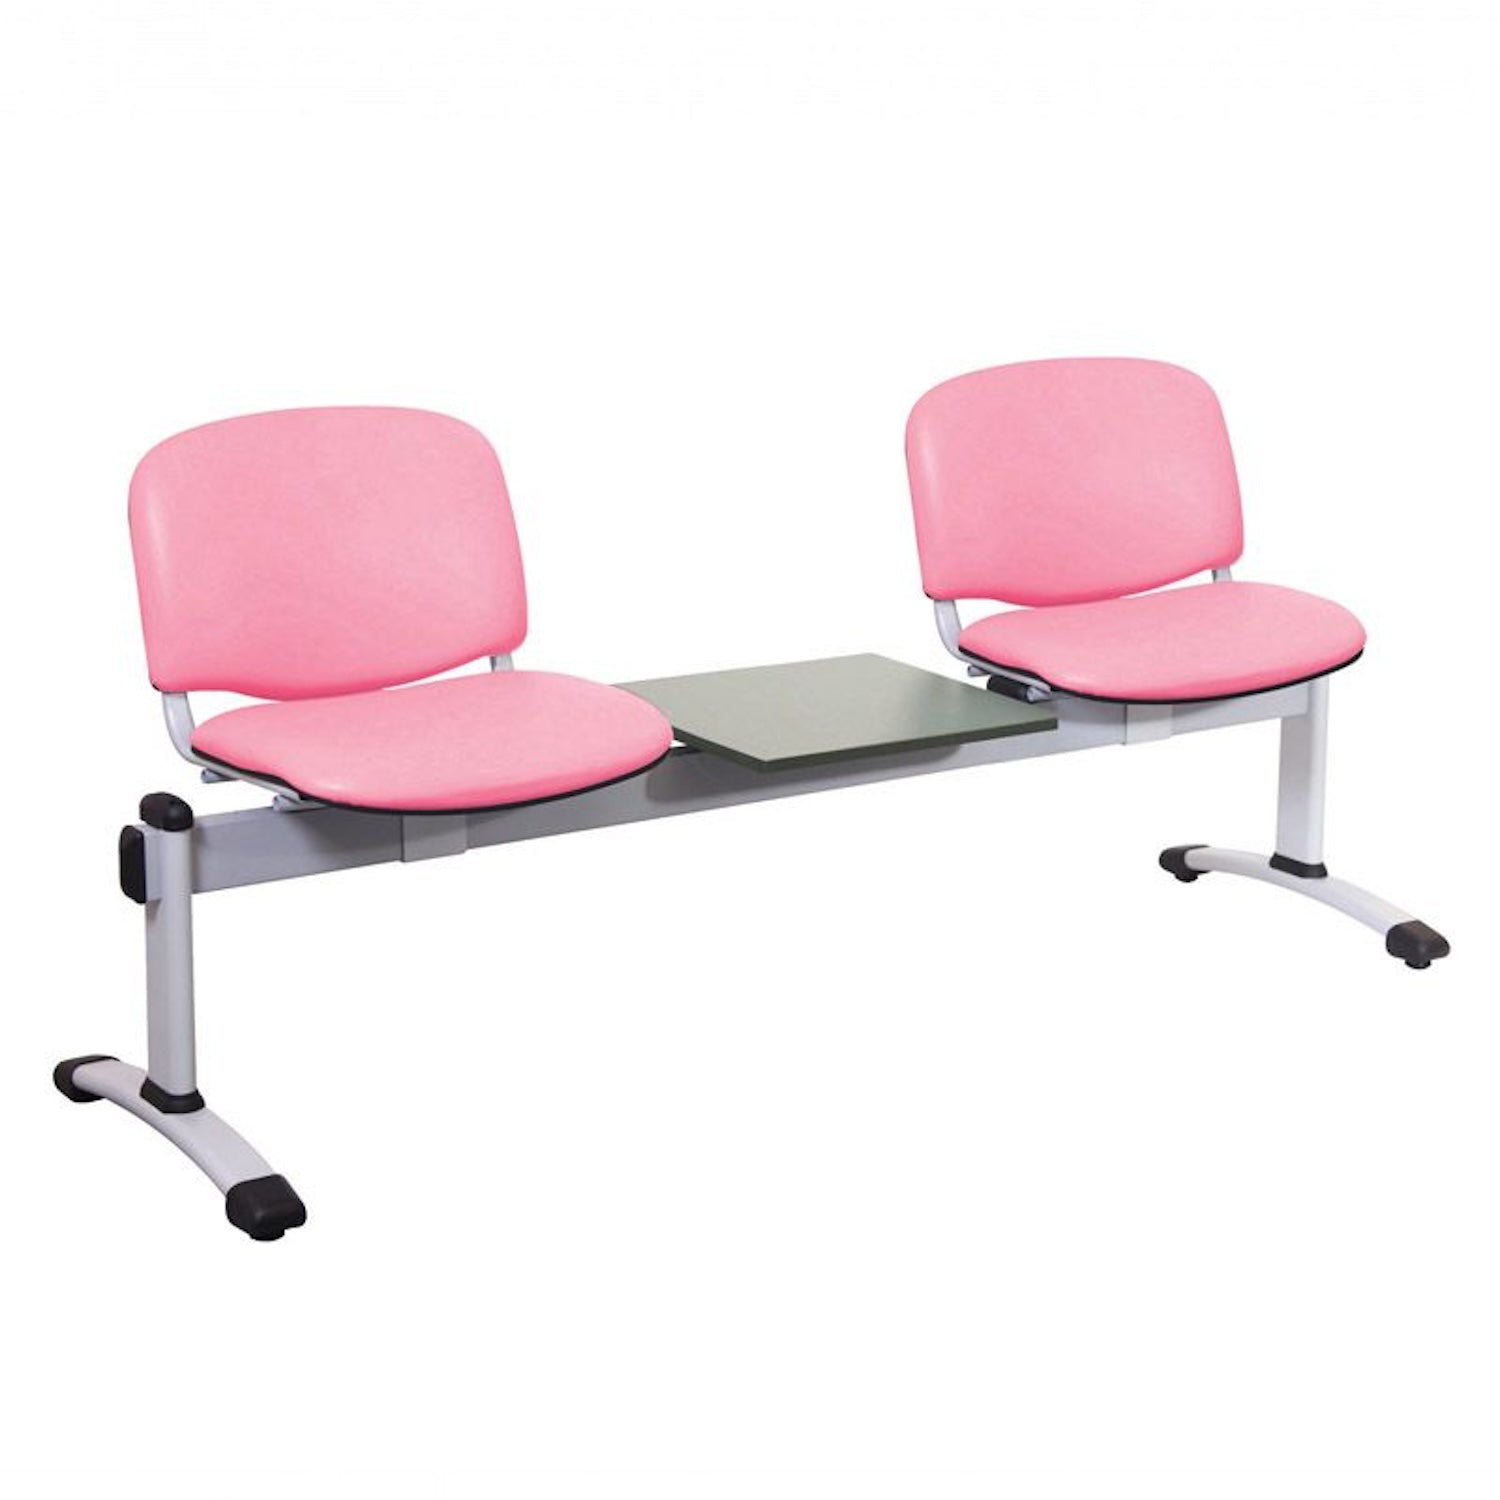 Sunflower Visitor 2 Anti-bacterial Vinyl Upholstery Seats & 1 Table Module in Salmon